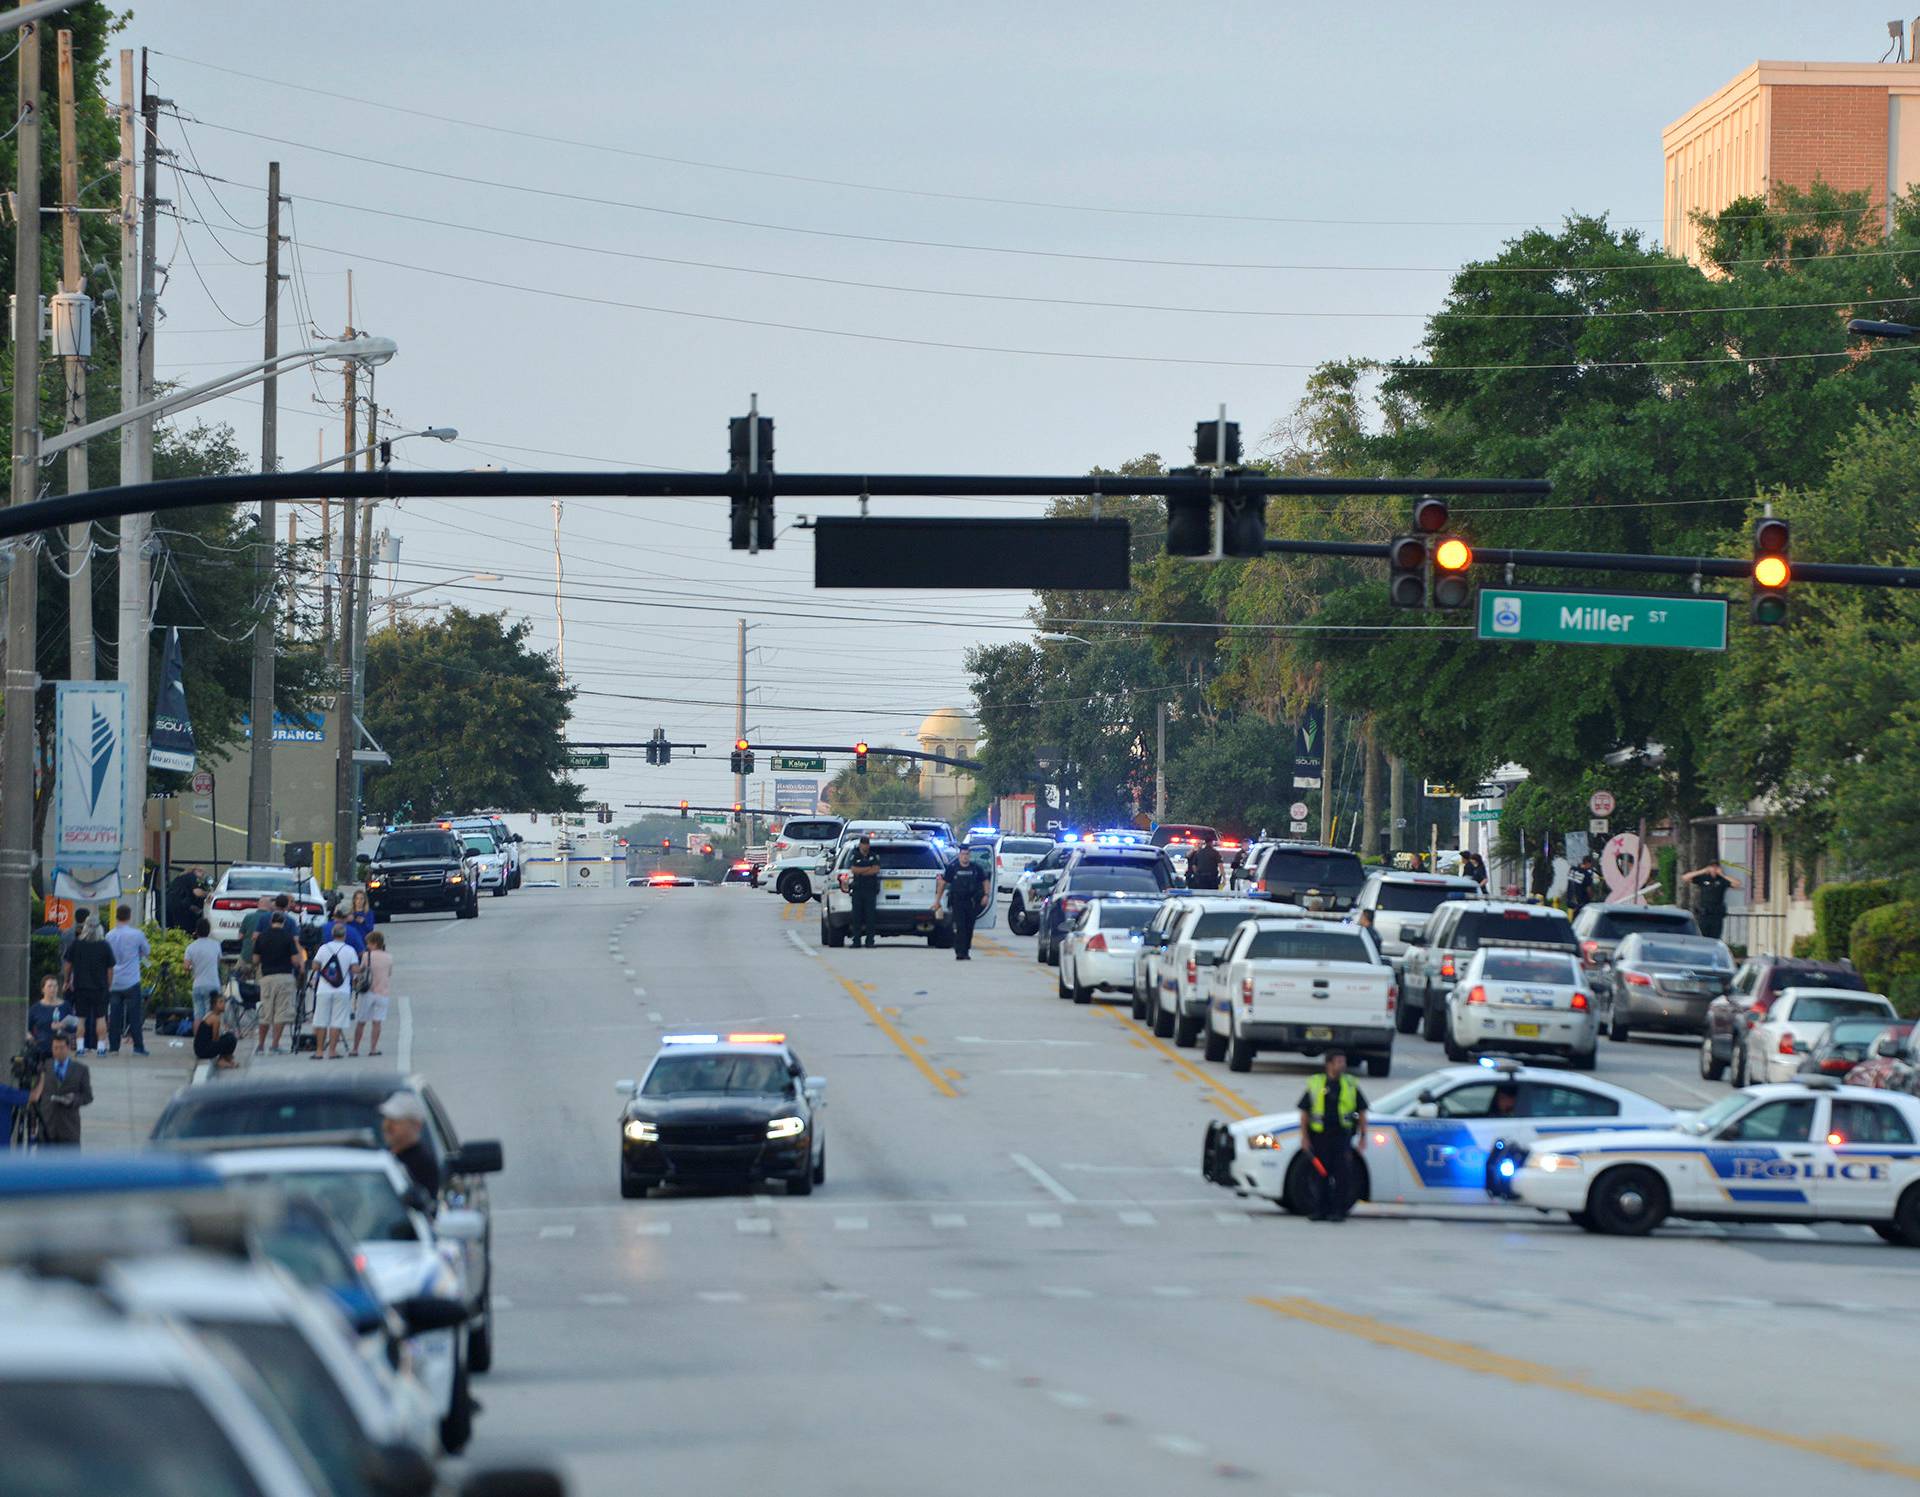 Police lock down Orange Avenue around Pulse nightclub, where people were killed by a gunman in a shooting rampage in Orlando